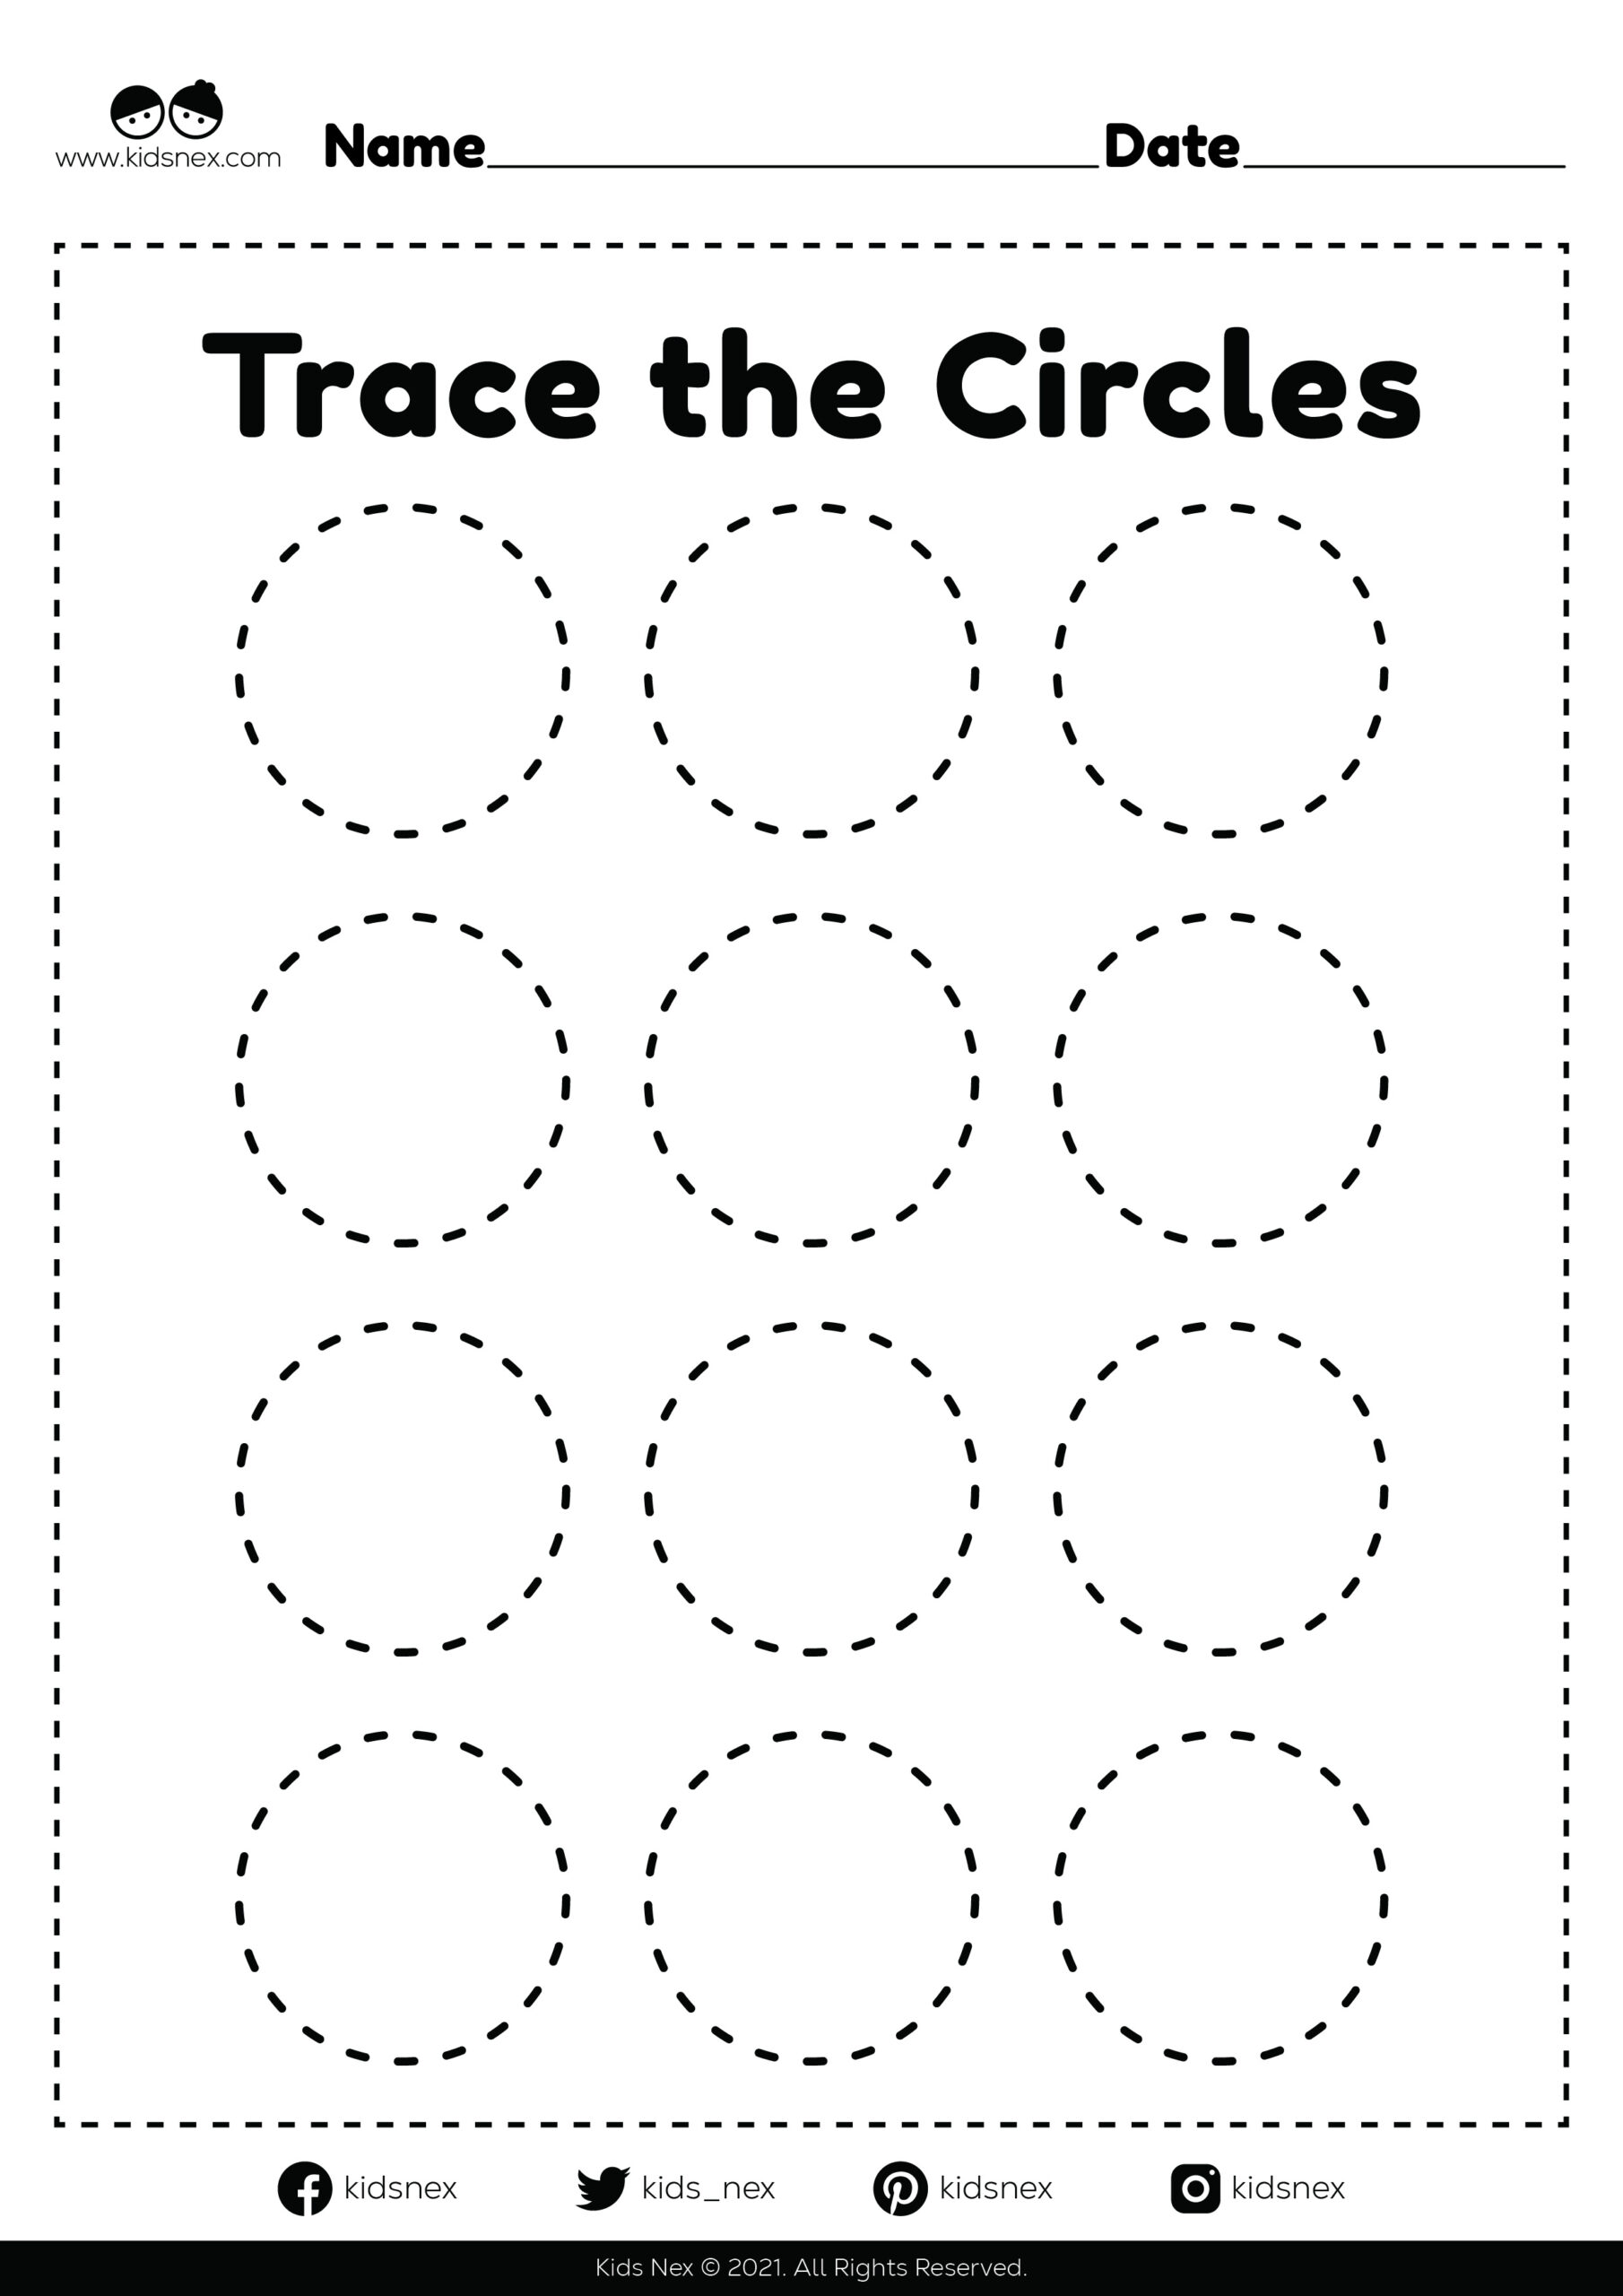 Tracing circles for kids educational worksheet for kindergarten and preschoolers for easy and fun activities in a printable illustration file format